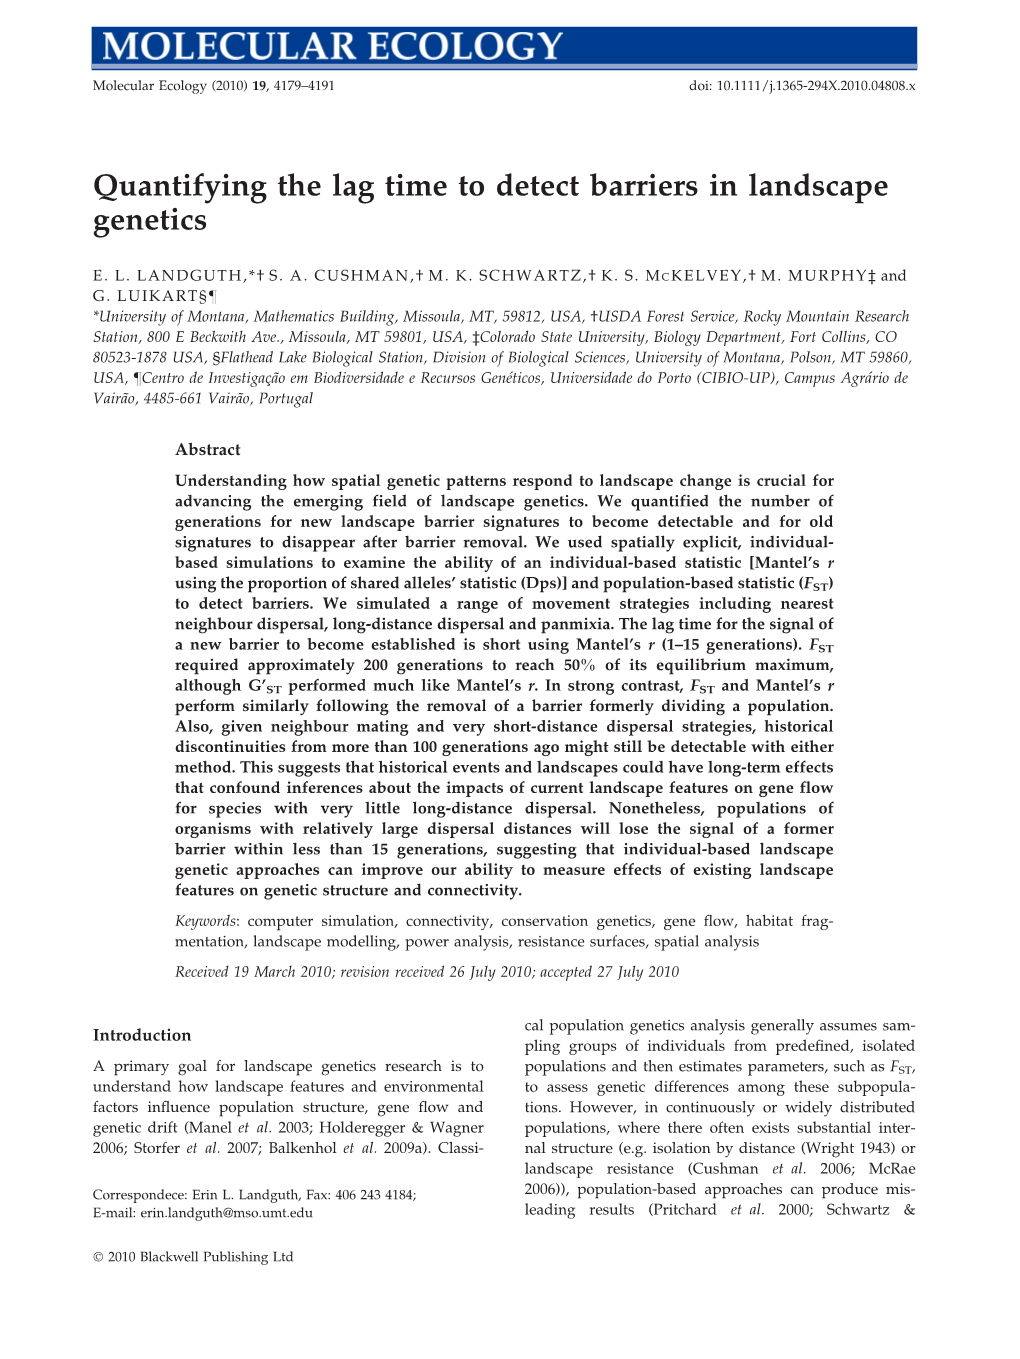 Quantifying the Lag Time to Detect Barriers in Landscape Genetics